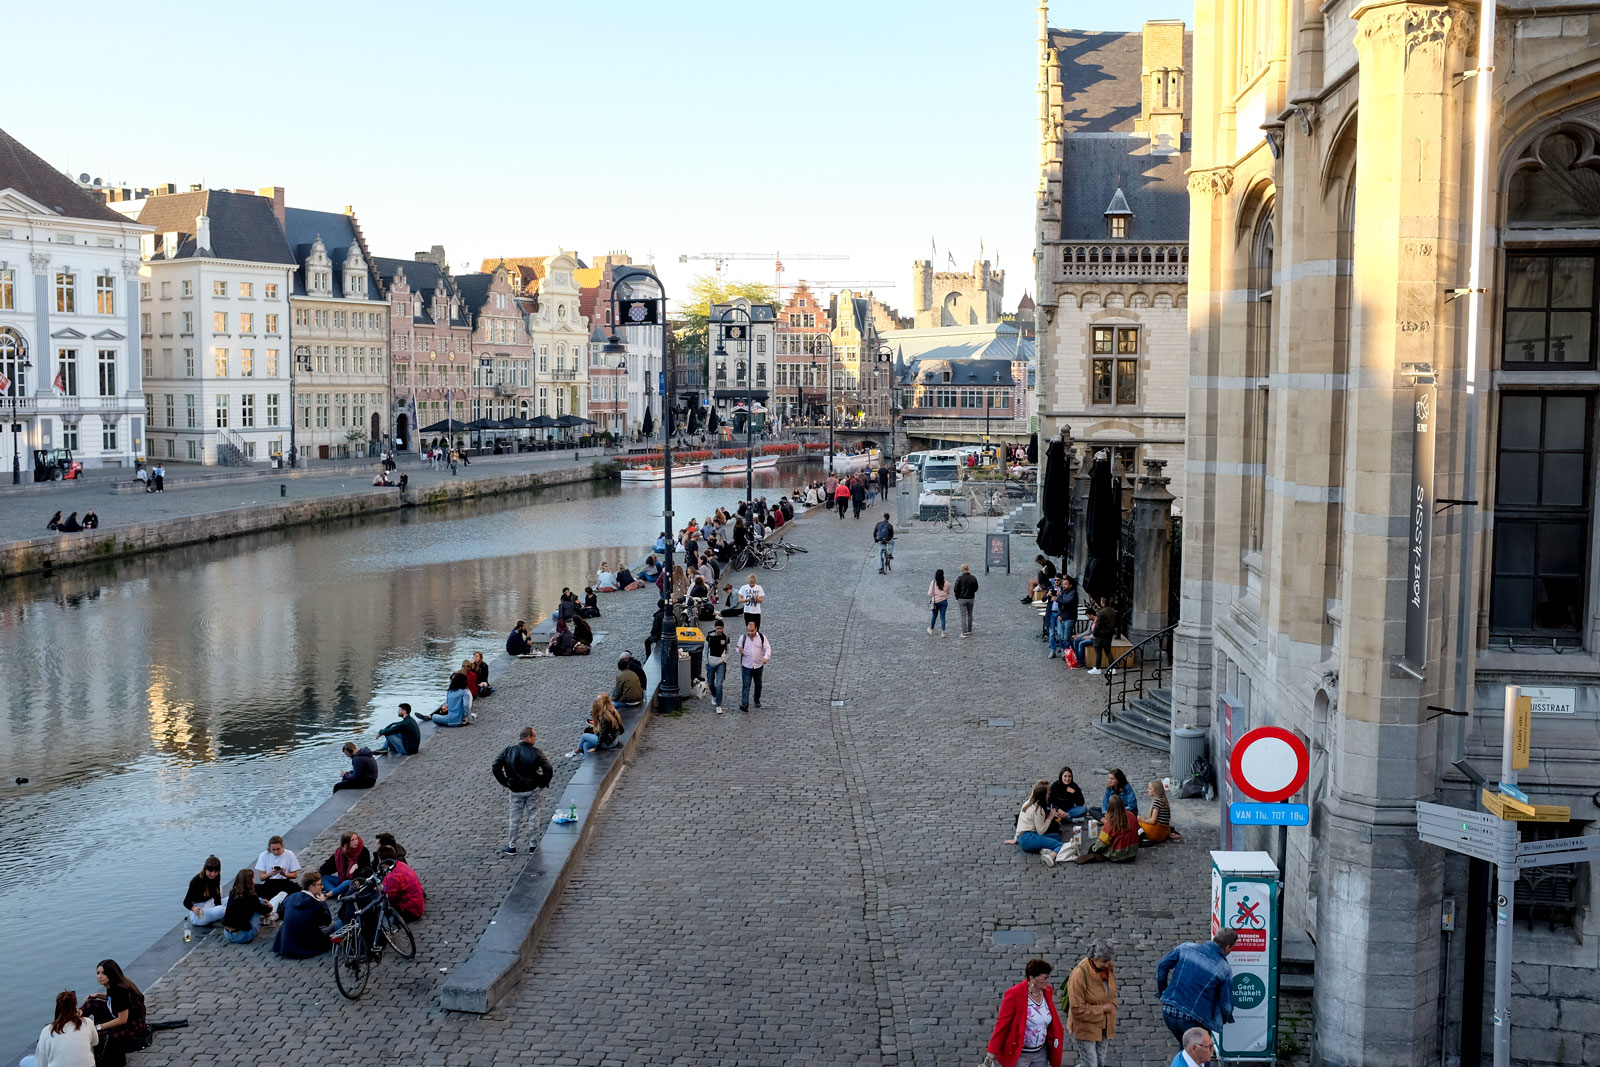 People hang out along the water in Ghent